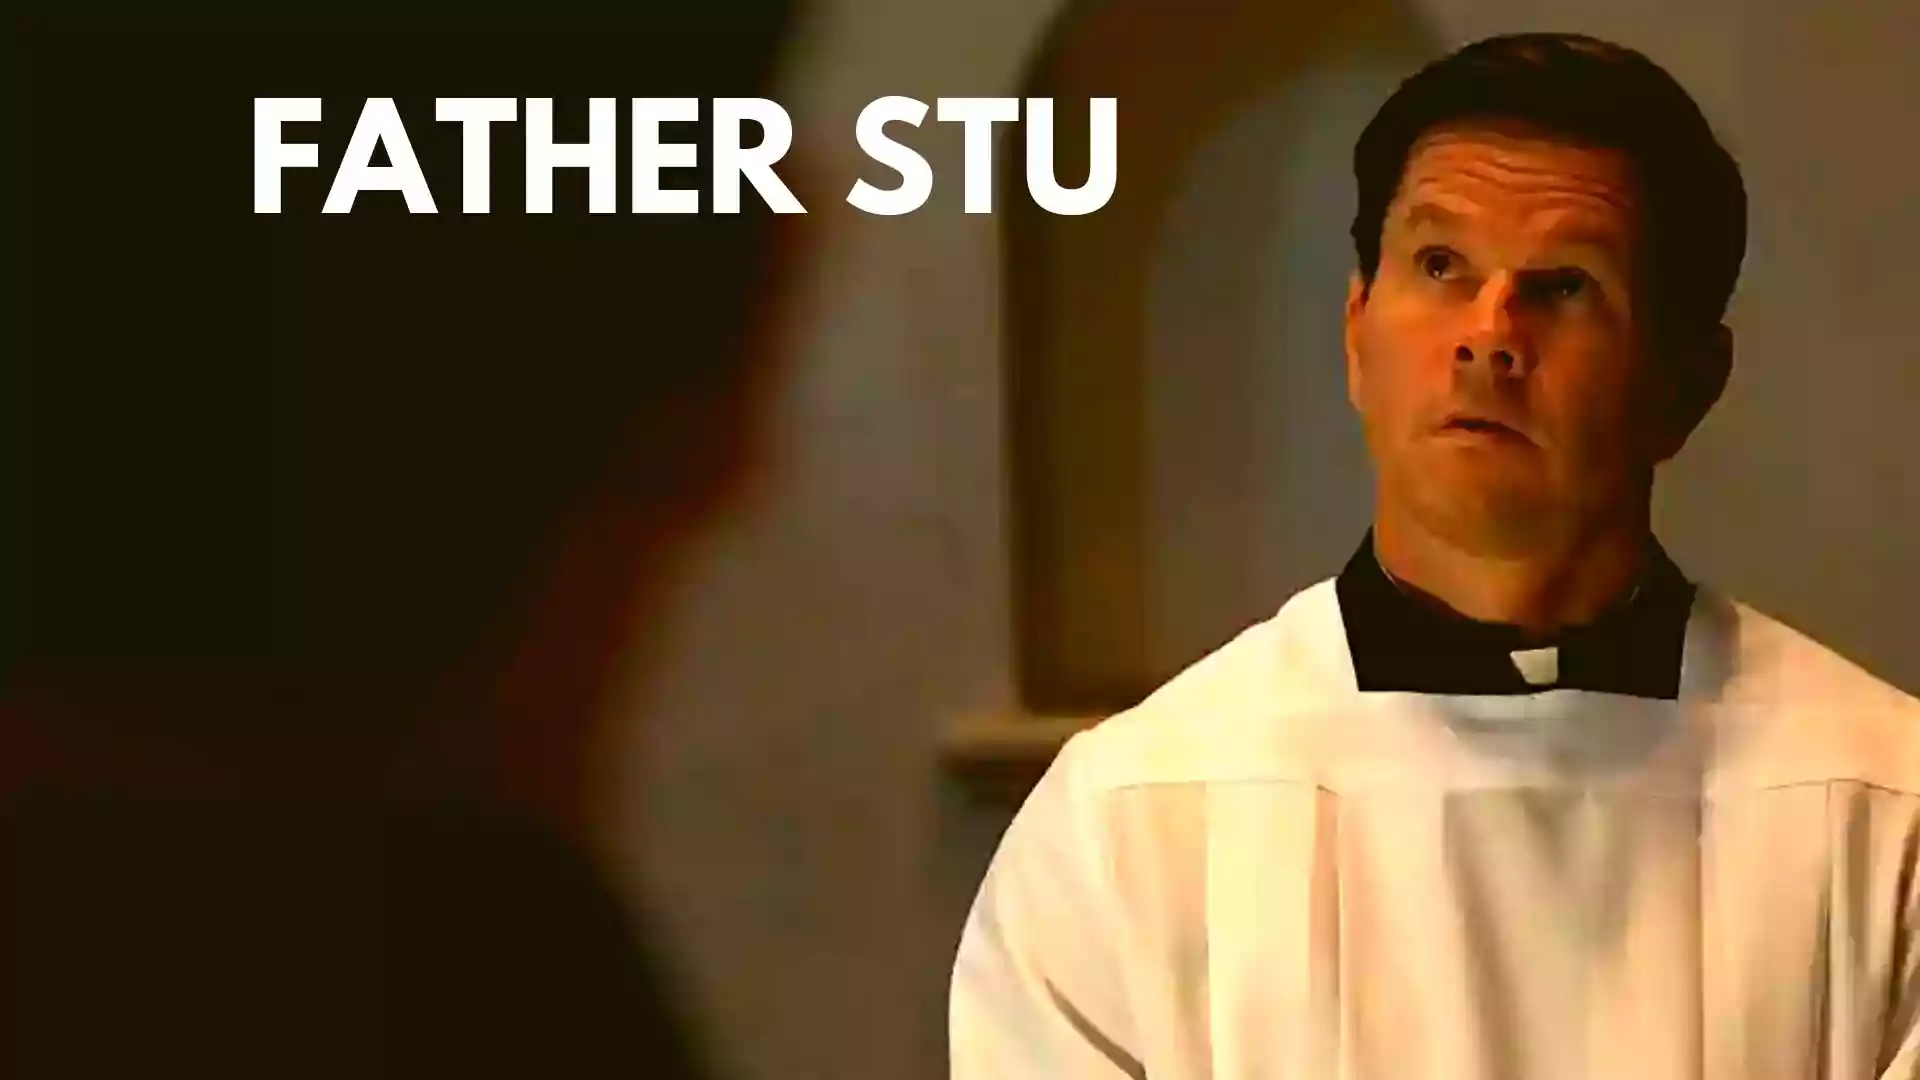 Father Stu Wallpaper and Image